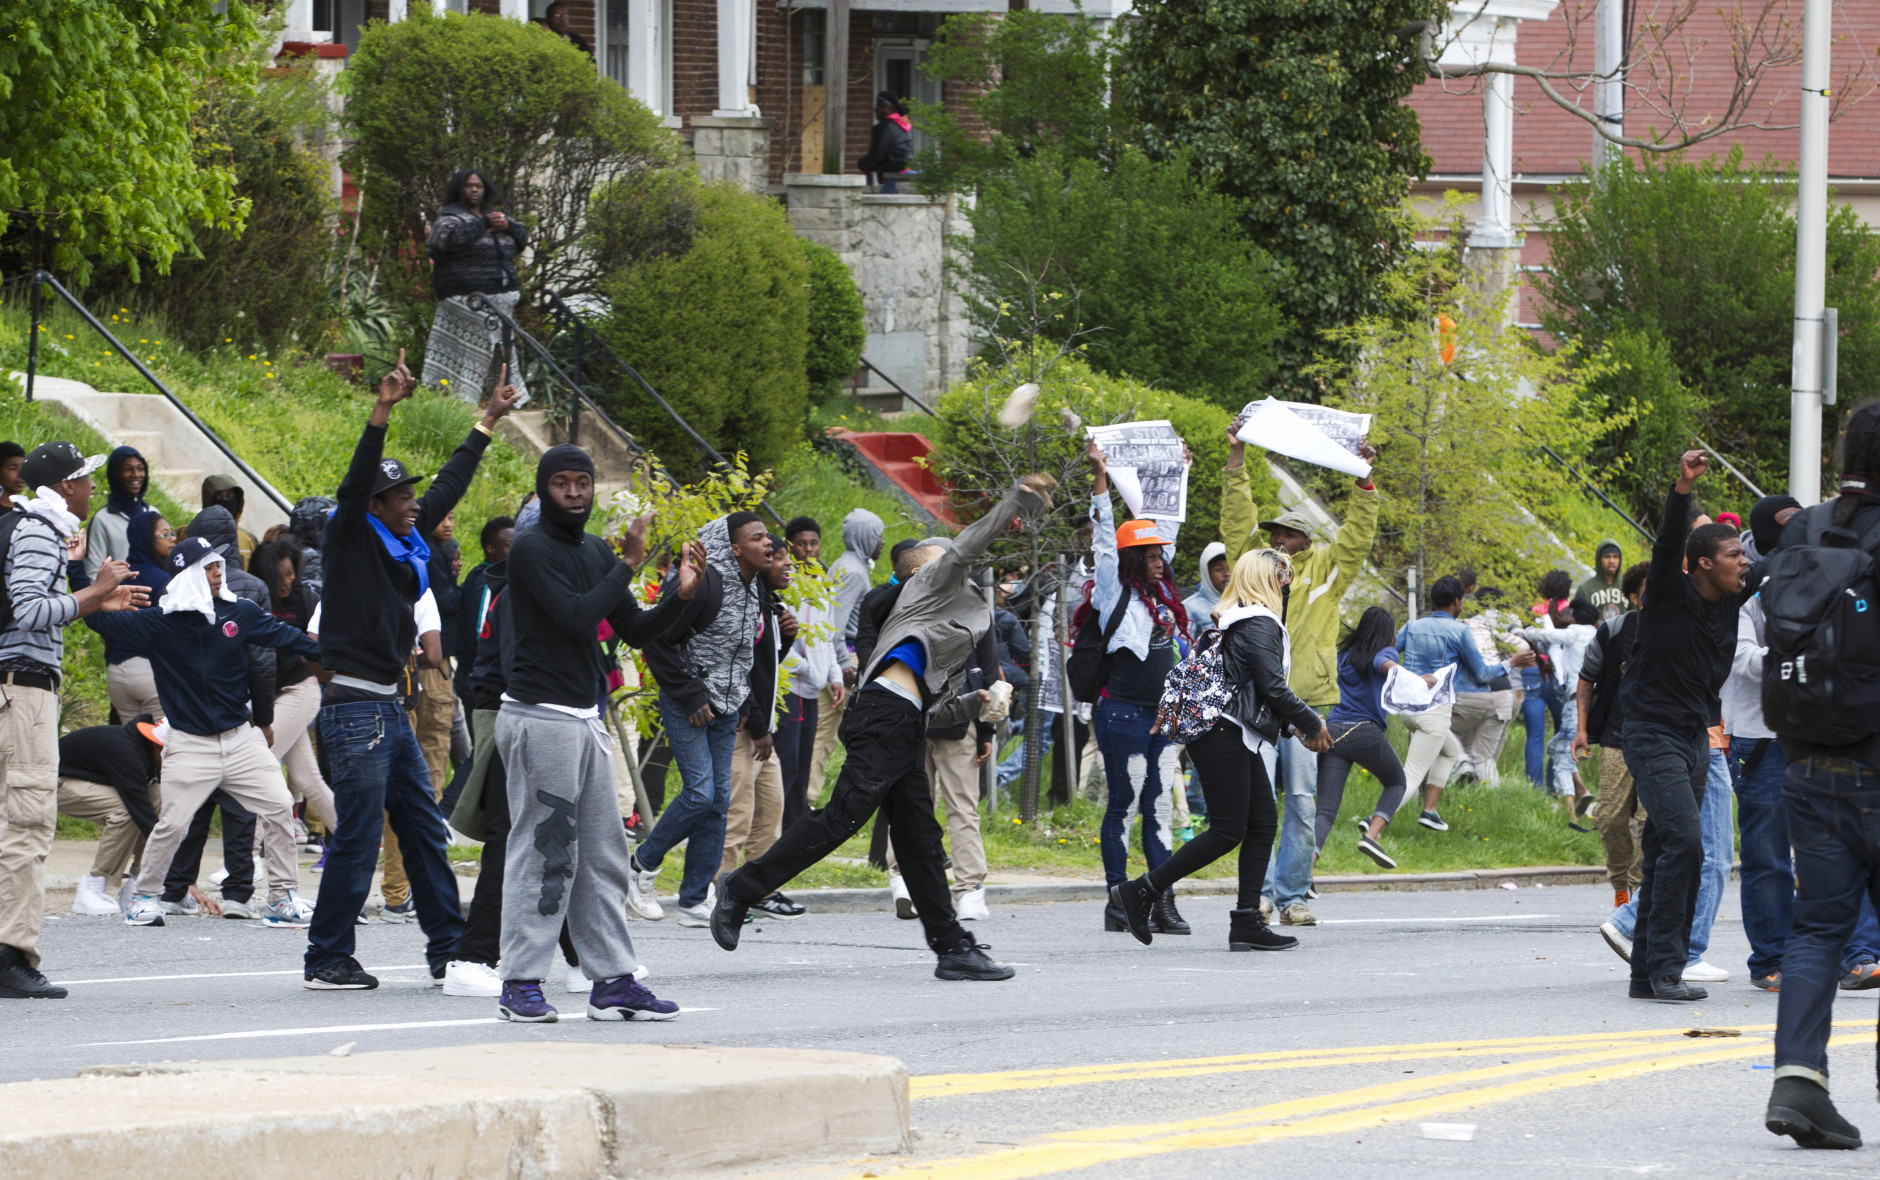 Demonstrators throw rocks to the police, after the funeral of Freddie Gray, Monday, April 27, 2015, at New Shiloh Baptist Church in Baltimore. Gray died from spinal injuries about a week after he was arrested and transported in a Baltimore Police Department van.  (AP Photo/Jose Luis Magana)